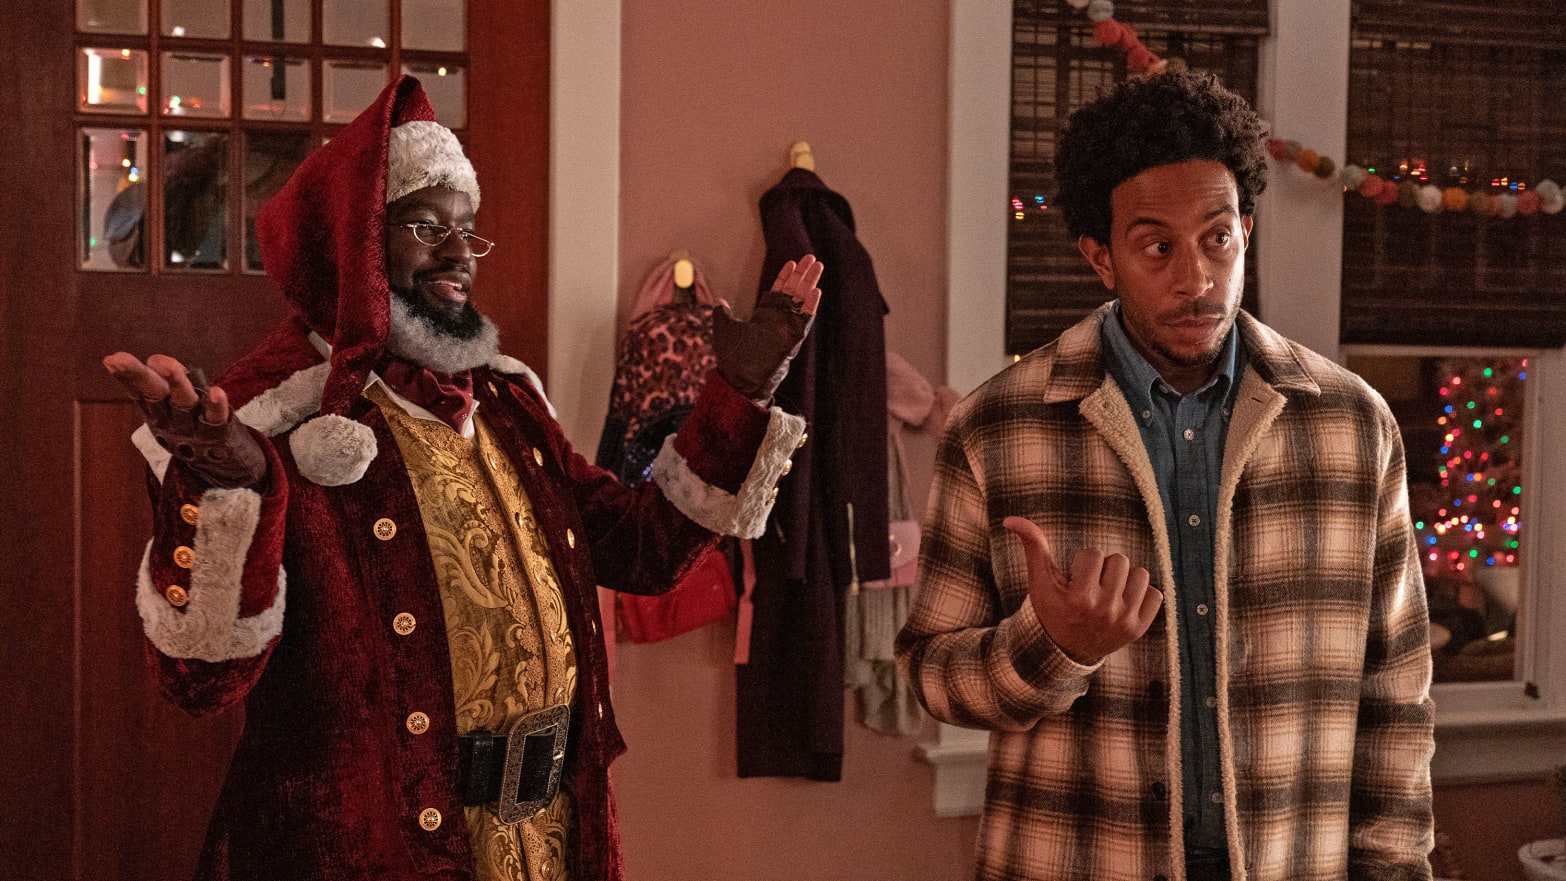 Lil Rel Howery dressed as Santa with Chris 'Ludacris' Bridges stand next to each other in a still from 'Dashing Through the Snow'